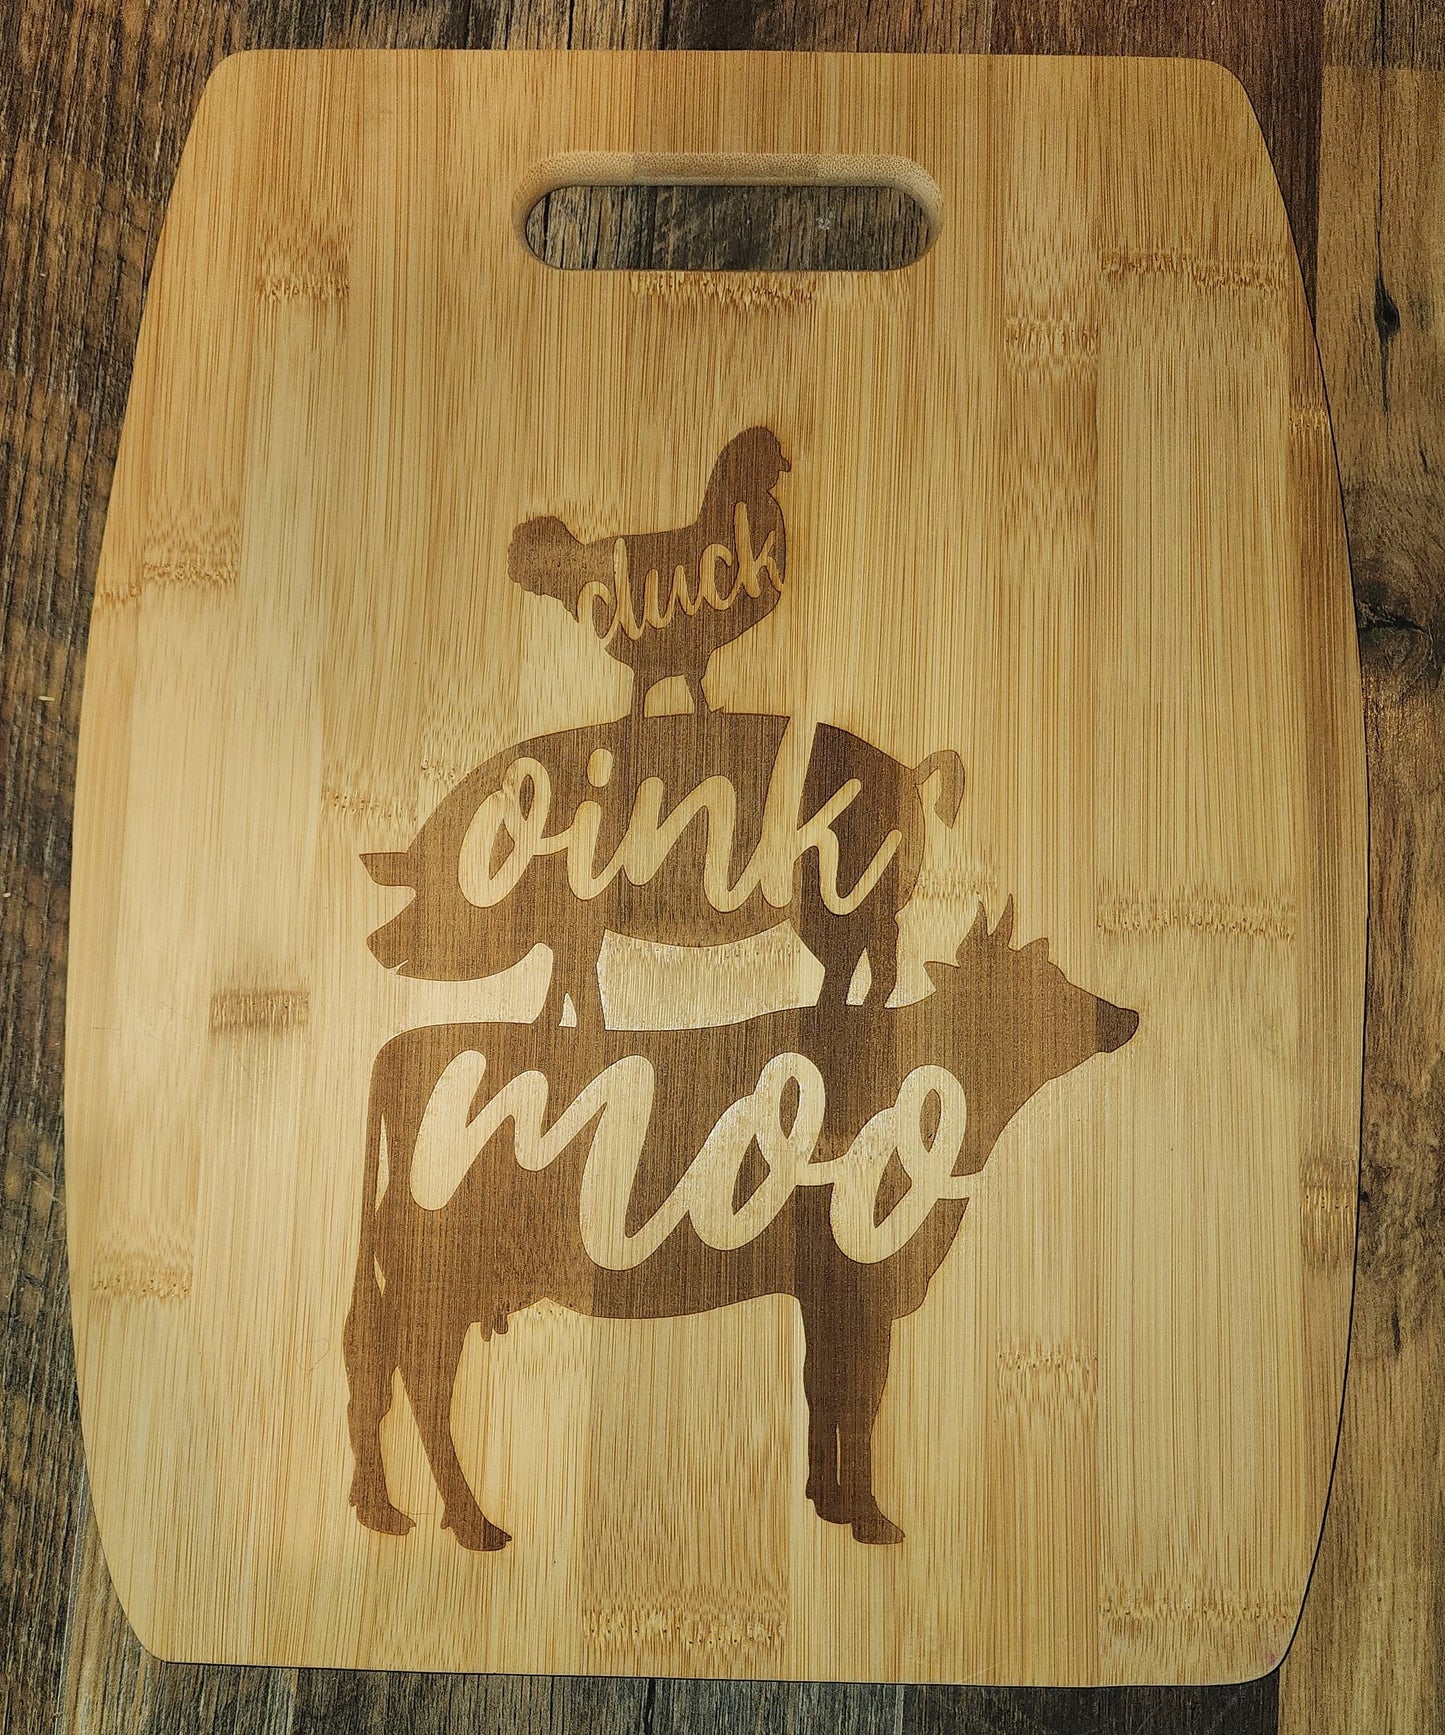 Livestock Animal, farm animal, cluck, chicken, oink, pig, moo, cow,  bamboo cutting board - Large Arc